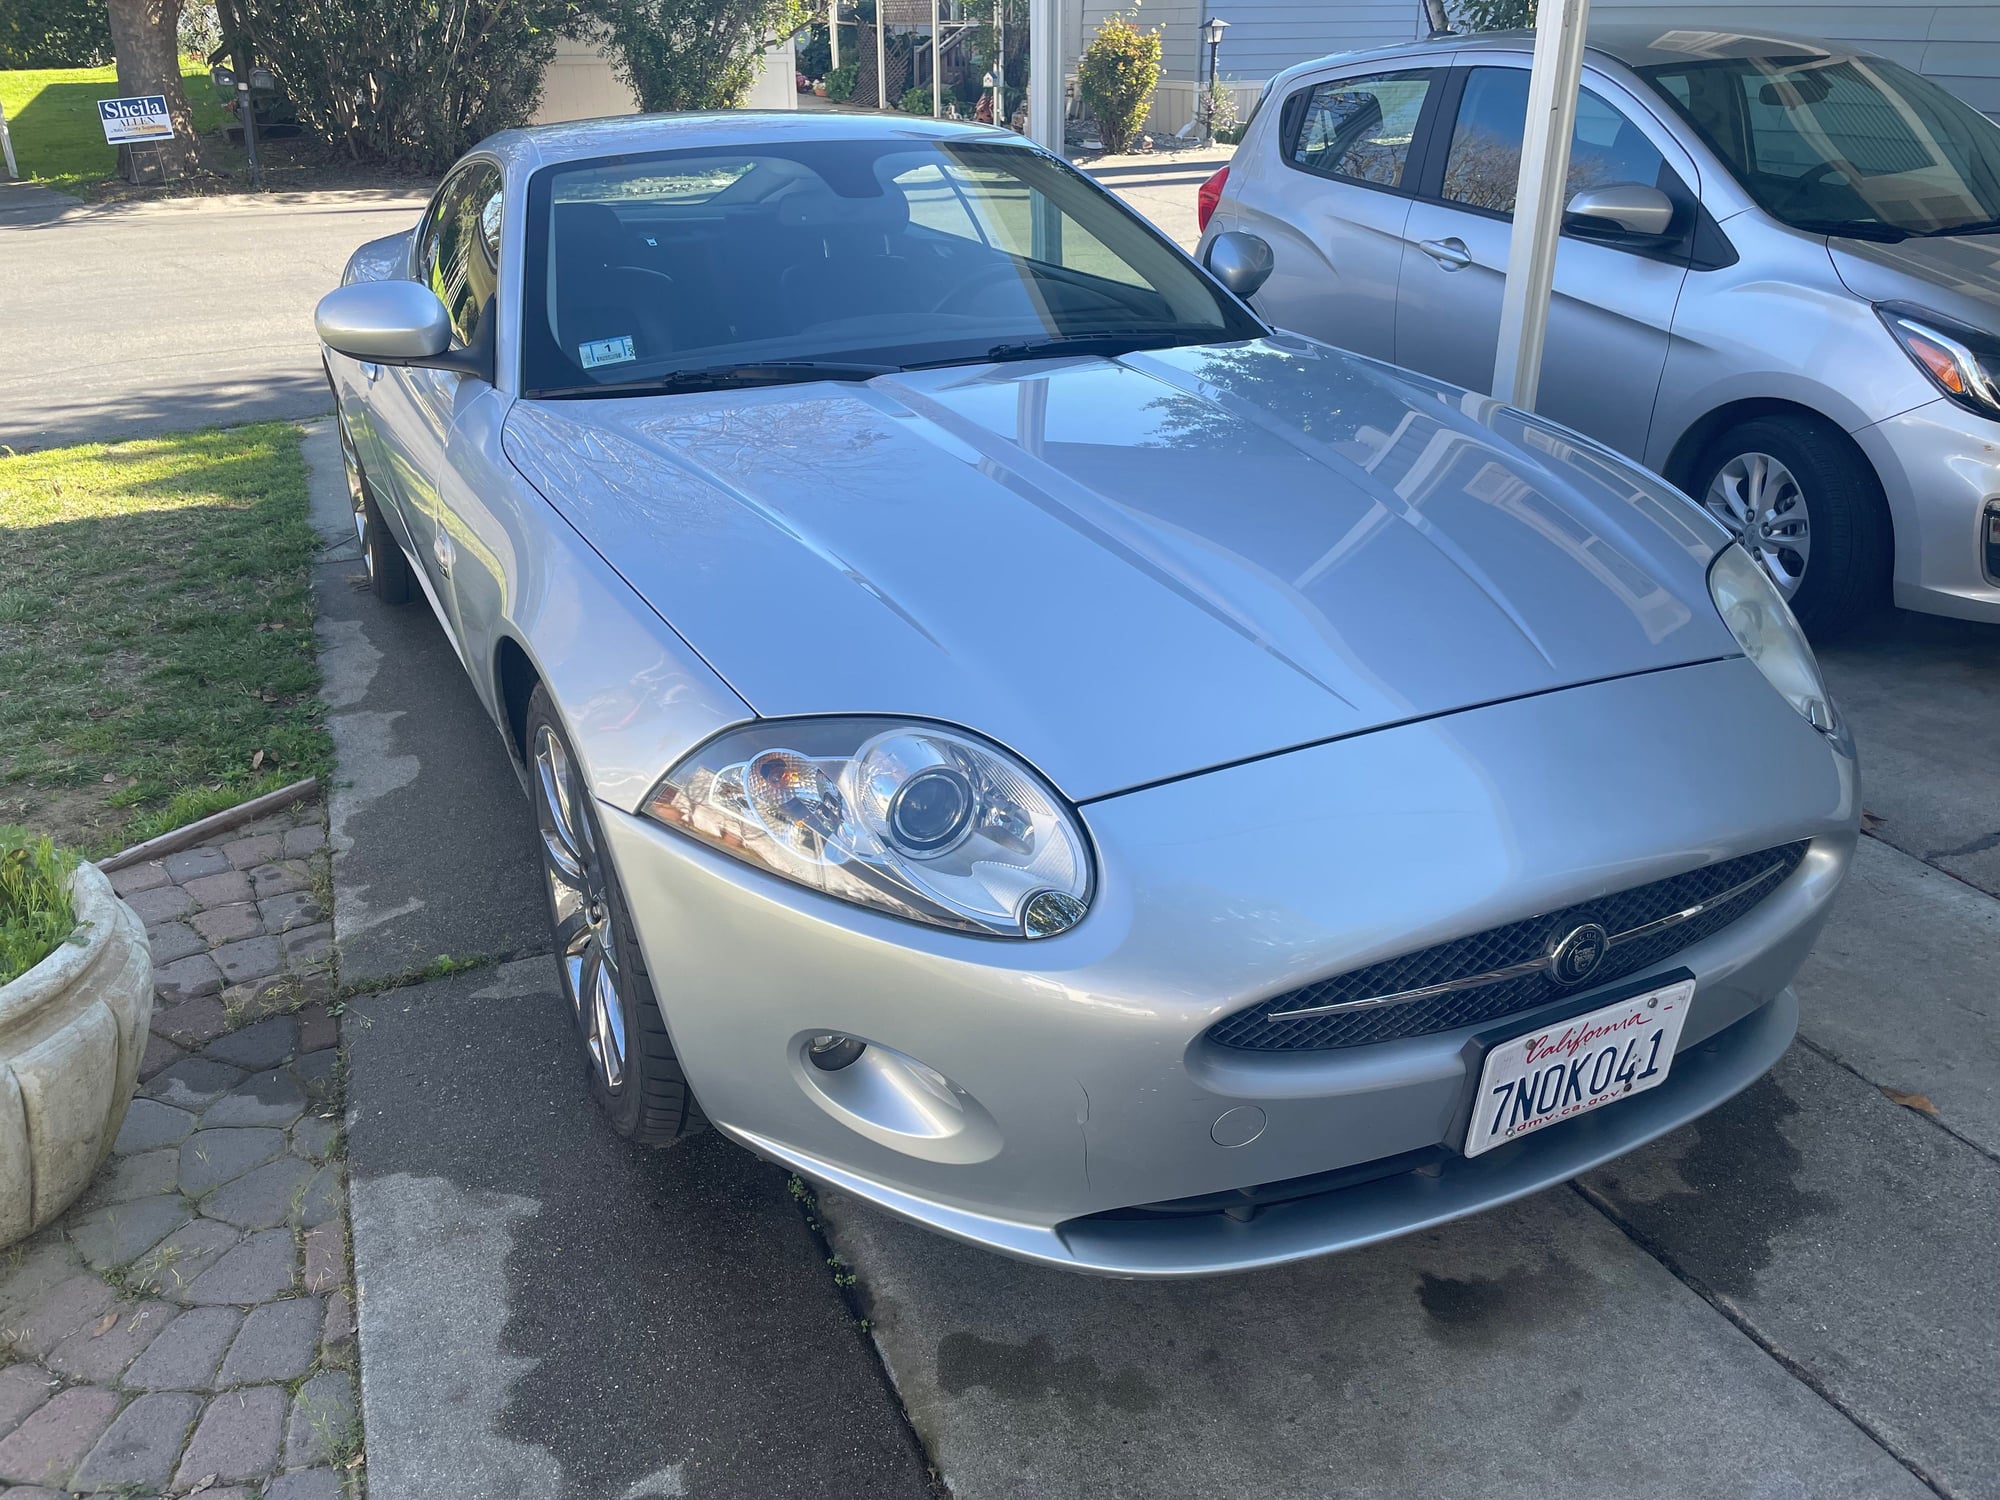 2007 Jaguar XK - Jaguar XK - ex-salvage, re-registered, 9 years great driving - Used - VIN SAJDA43B075B00507 - 58,593 Miles - 8 cyl - 2WD - Automatic - Coupe - Silver - Davis, CA 95618, United States